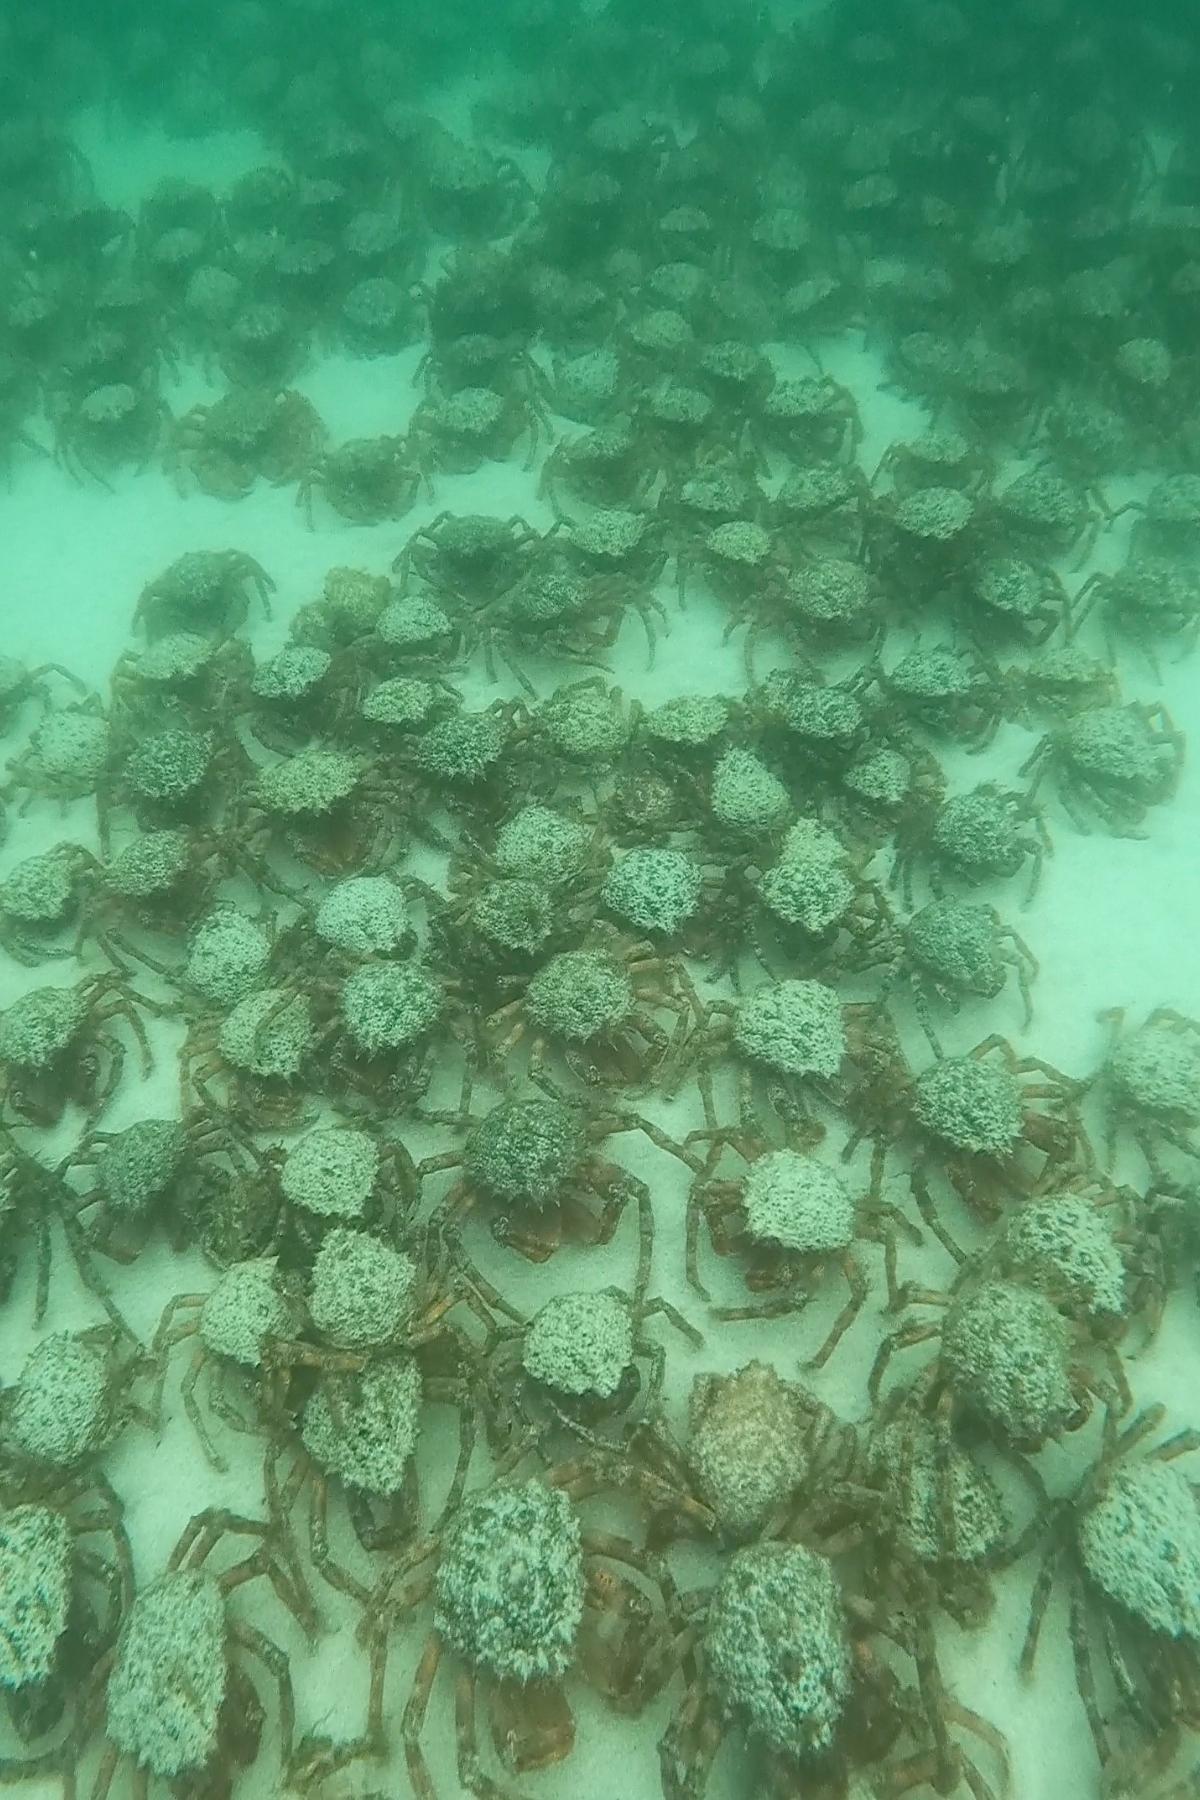 Giant spider crabs amass in multiple locations off Cornwall’s coast, credit Katie Maggs